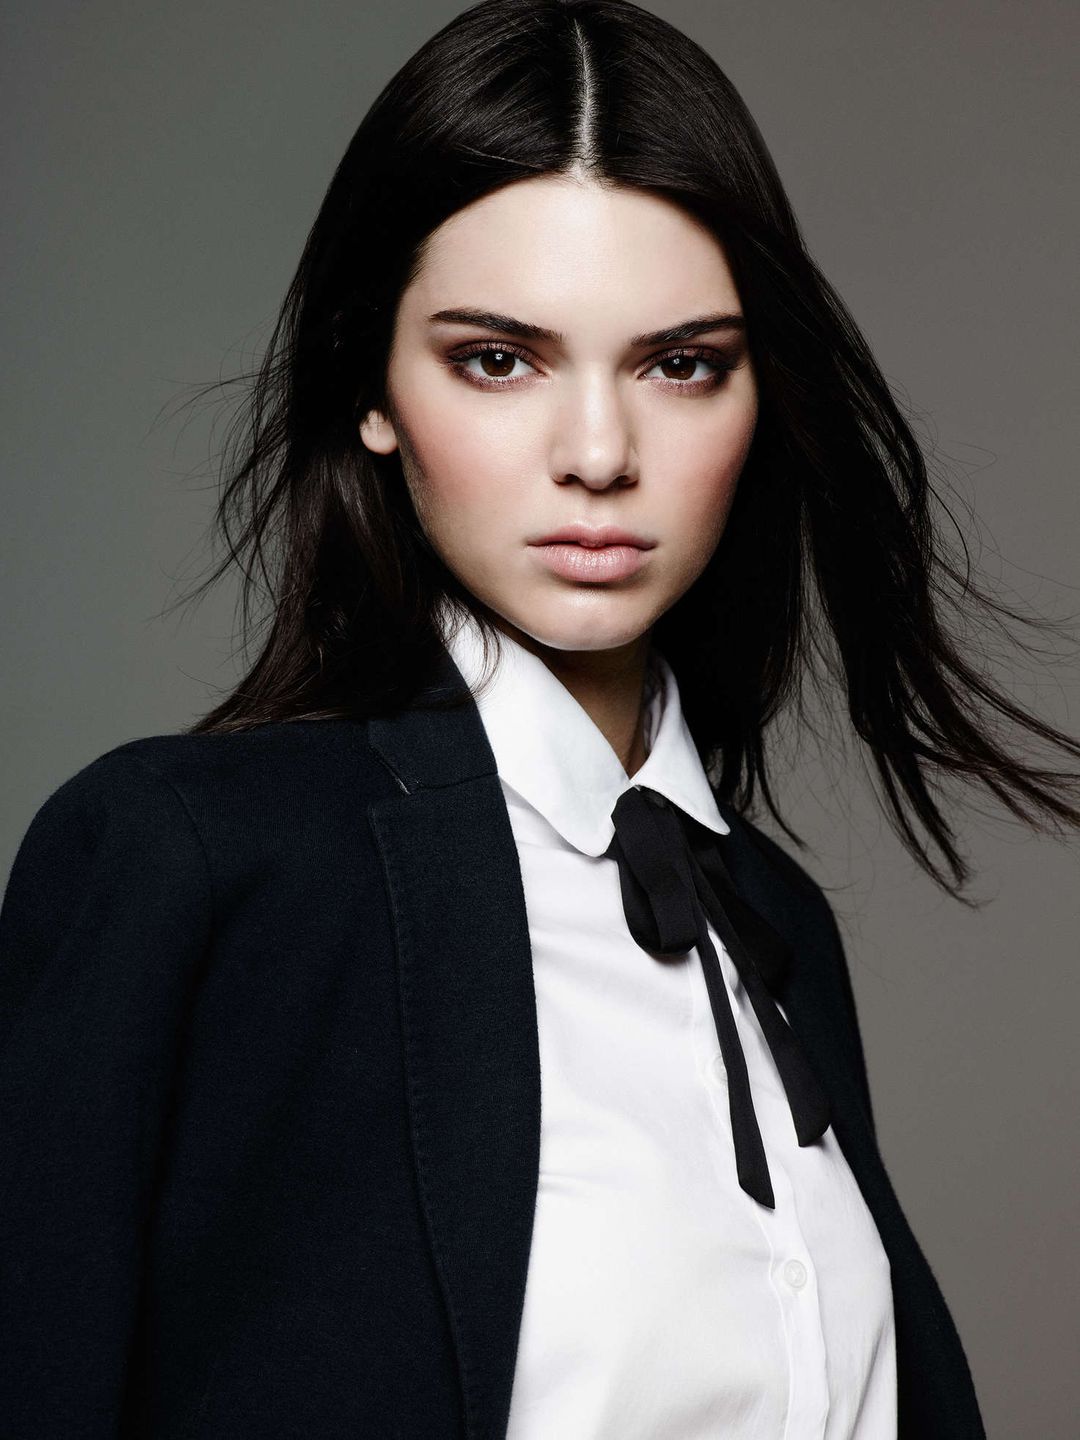 Kendall Jenner early life